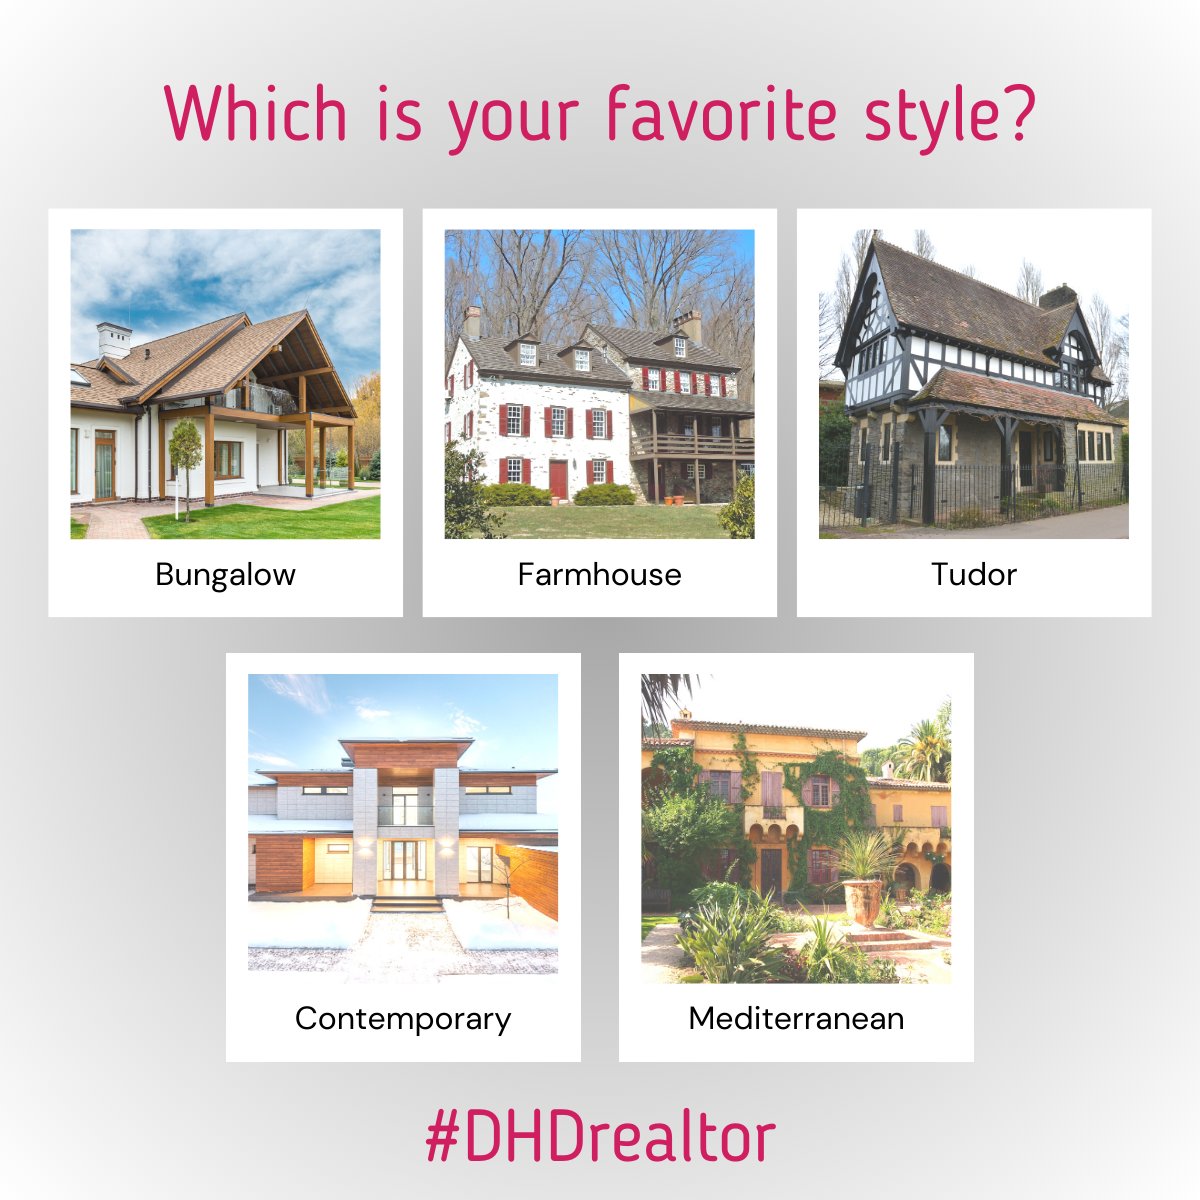 🏘️What's your favorite style of home❓🤩
#thisorthat #whichdoyouprefer #homestyle #sellingthedream #homesweethome #homeiswheretheheartis #realtor #DHDrealtor #realestate #eXprealty #DHDhomes #eXprealtyproud